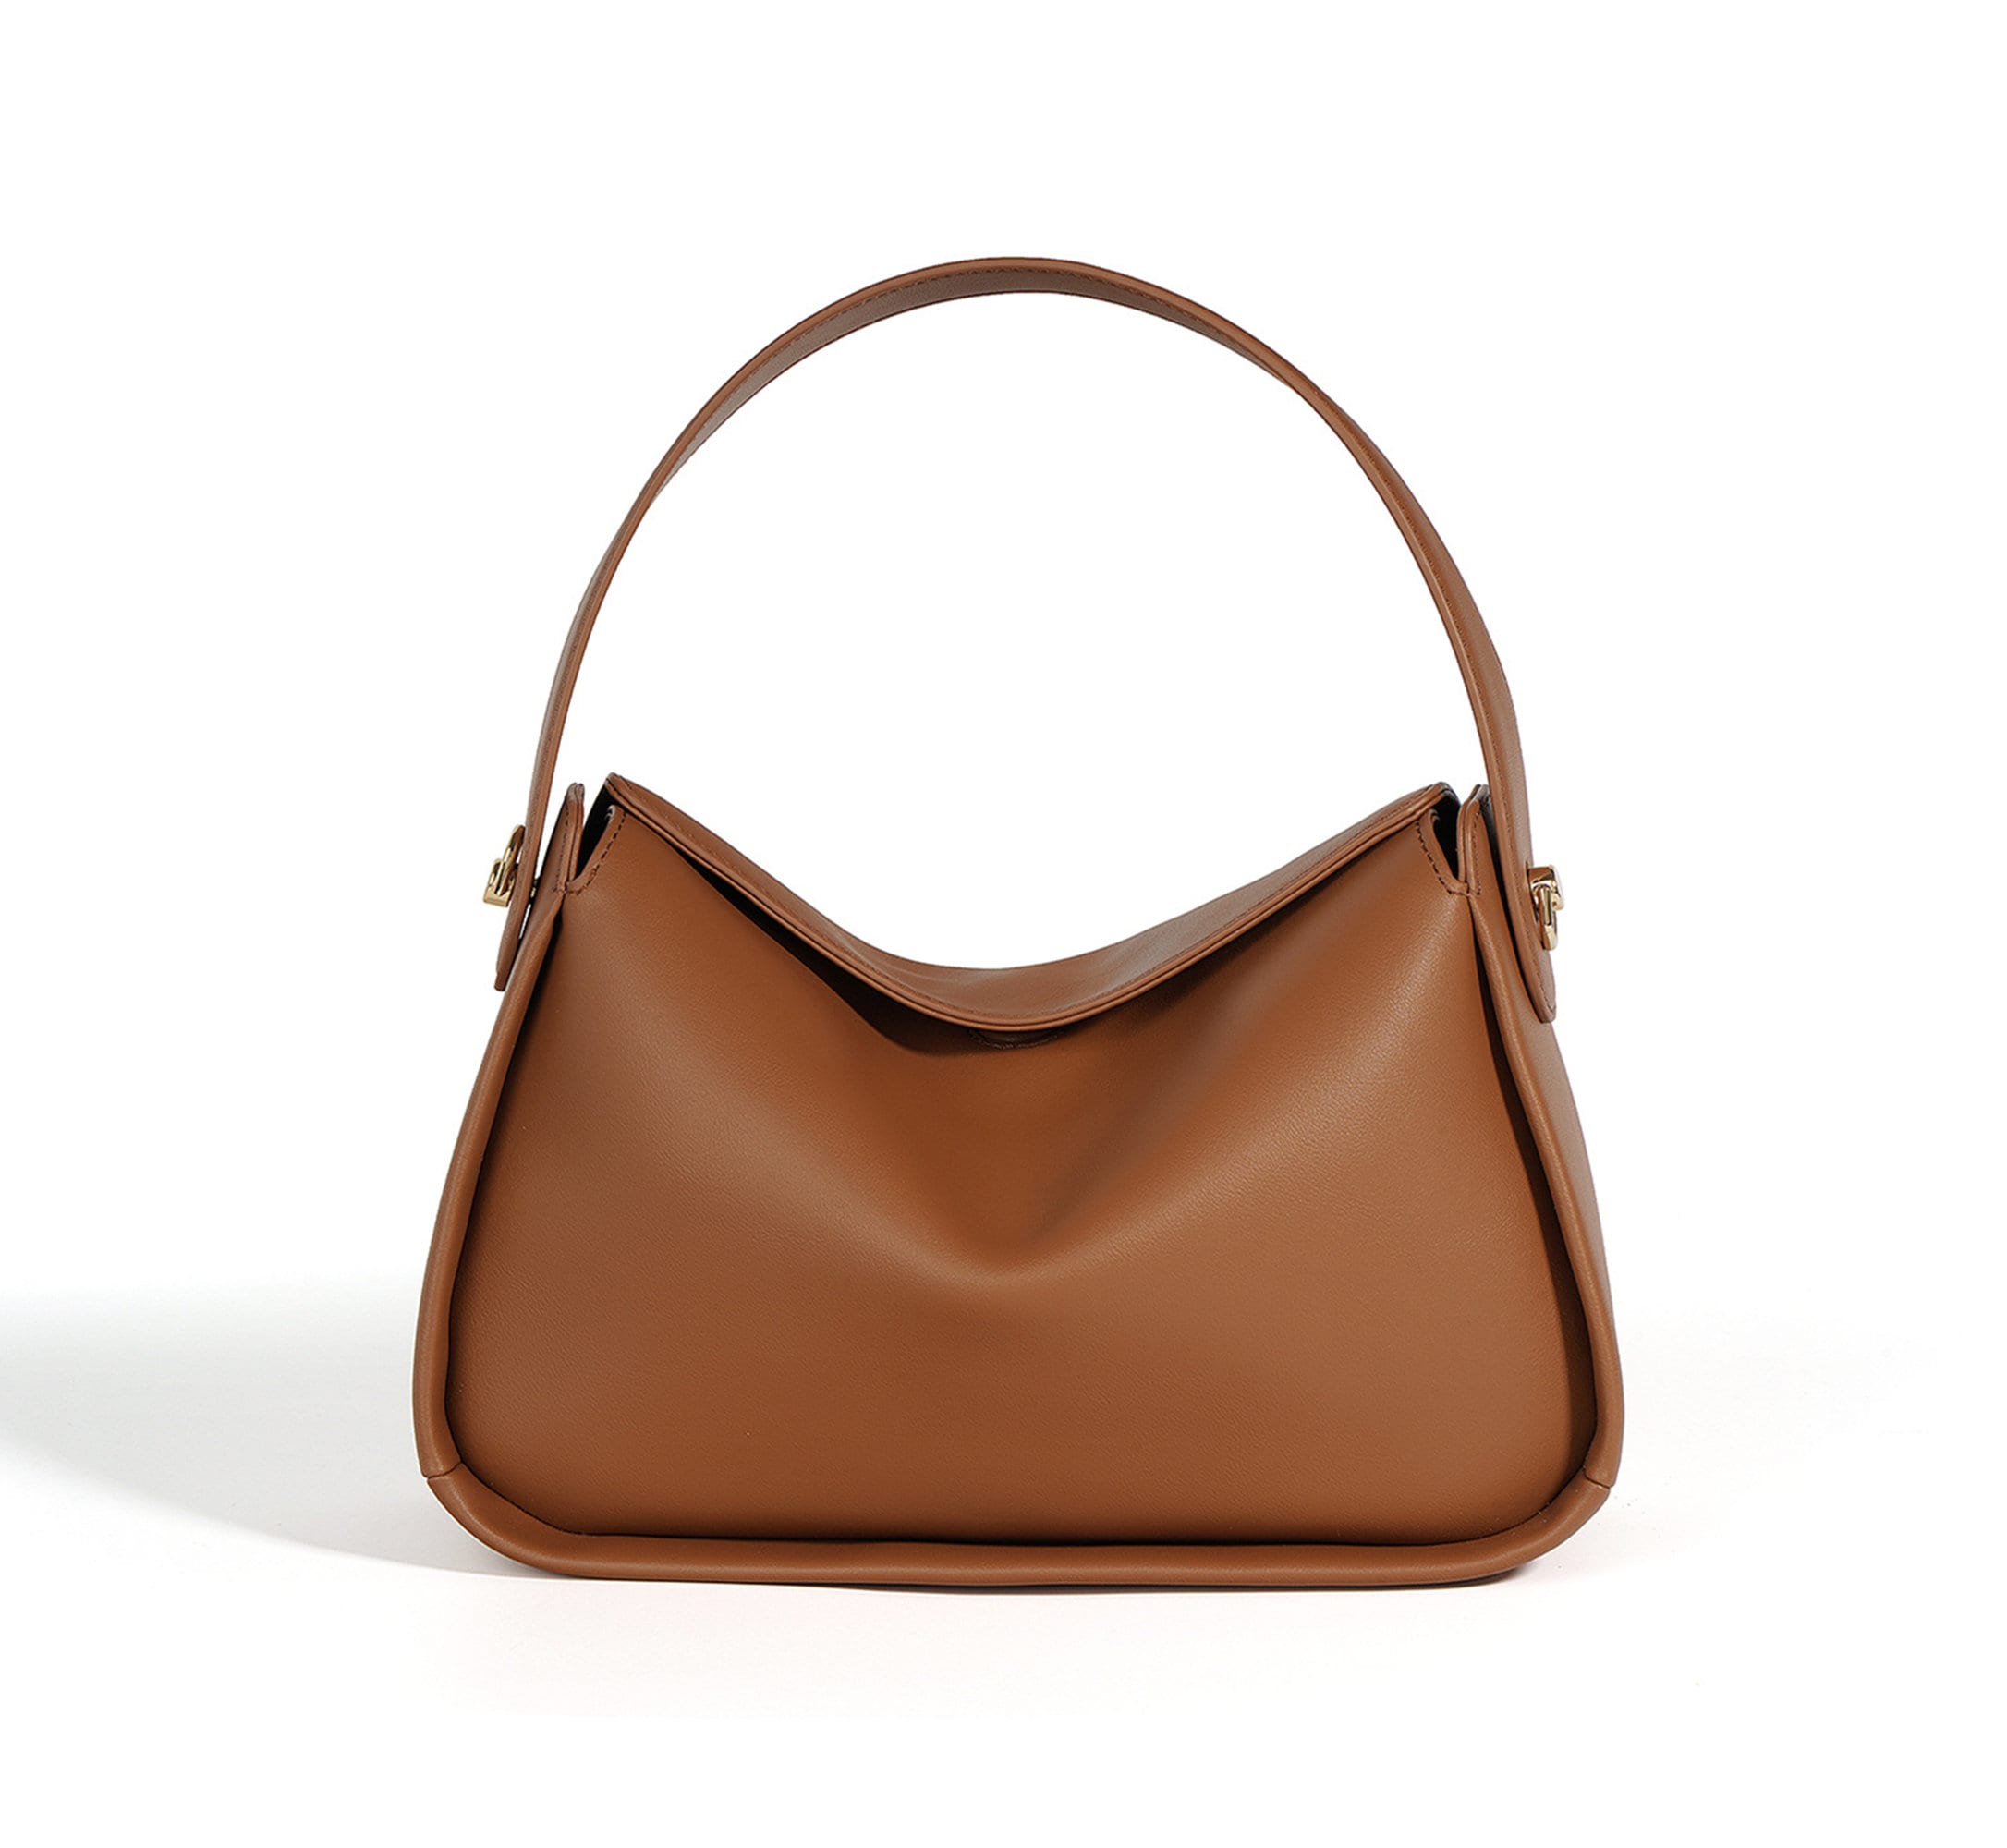 Luxury Bag Dupes: High End Style for Less - luxfy